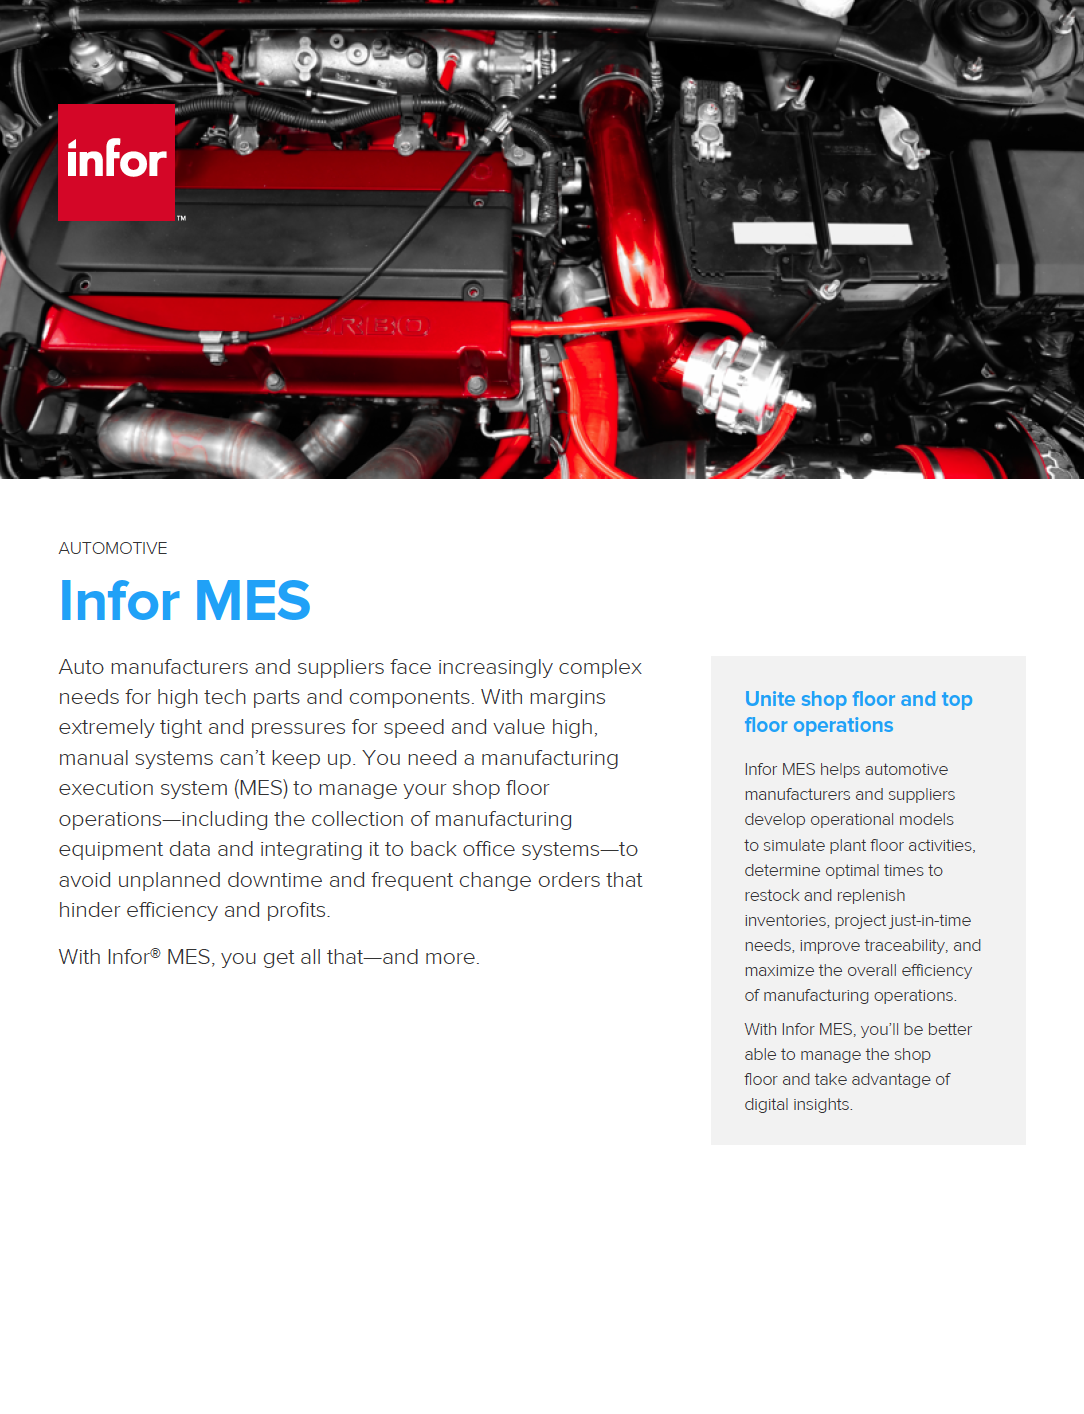 Infor Supplier Exchange for Automotive